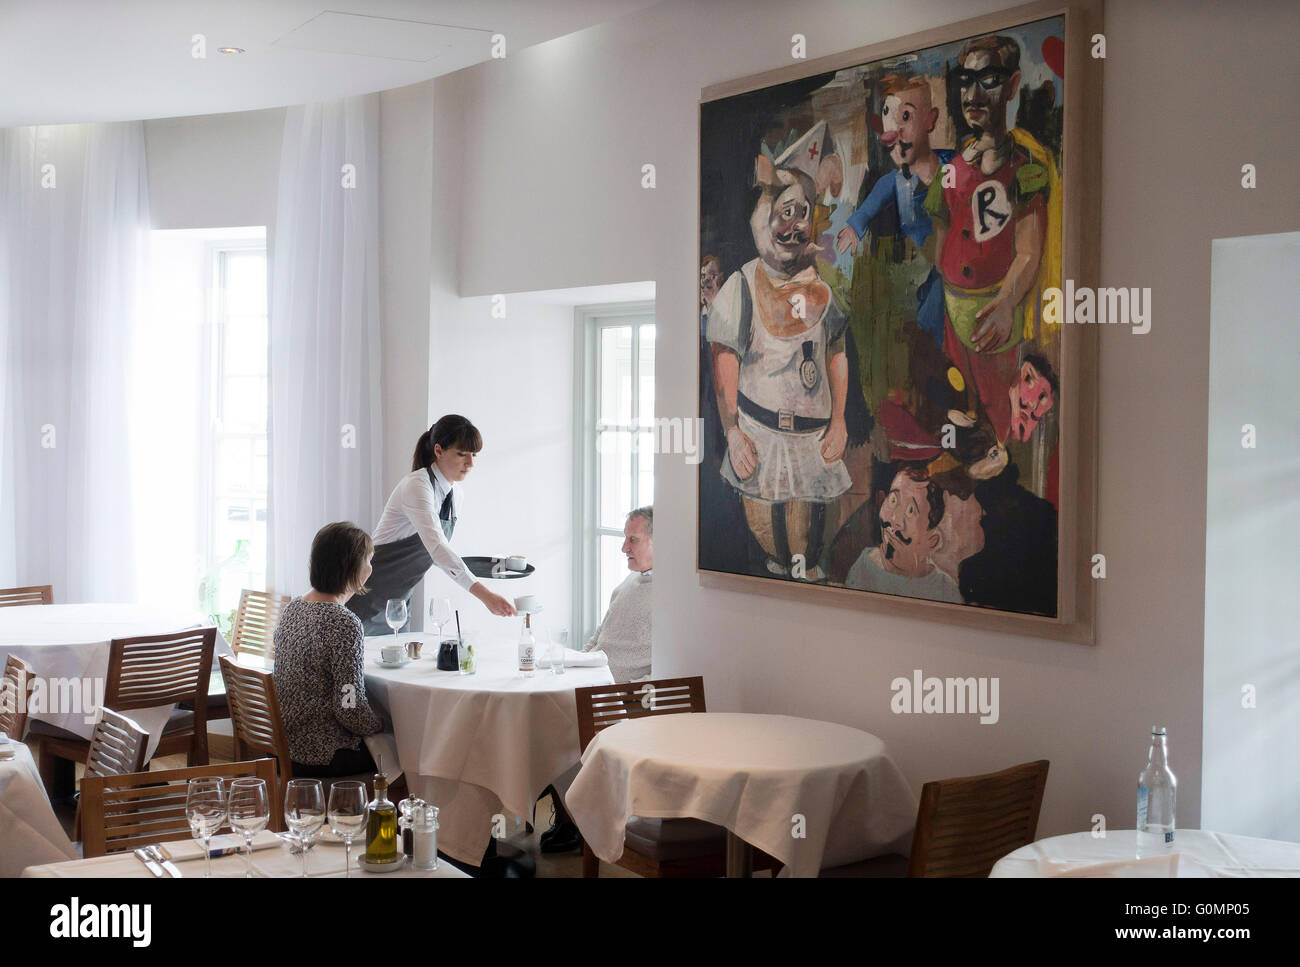 Rick Stein's Seafood Restaurant in Padstow,Cornwall: painting by Mclean Edwards called Gold,Platinum Records Stock Photo